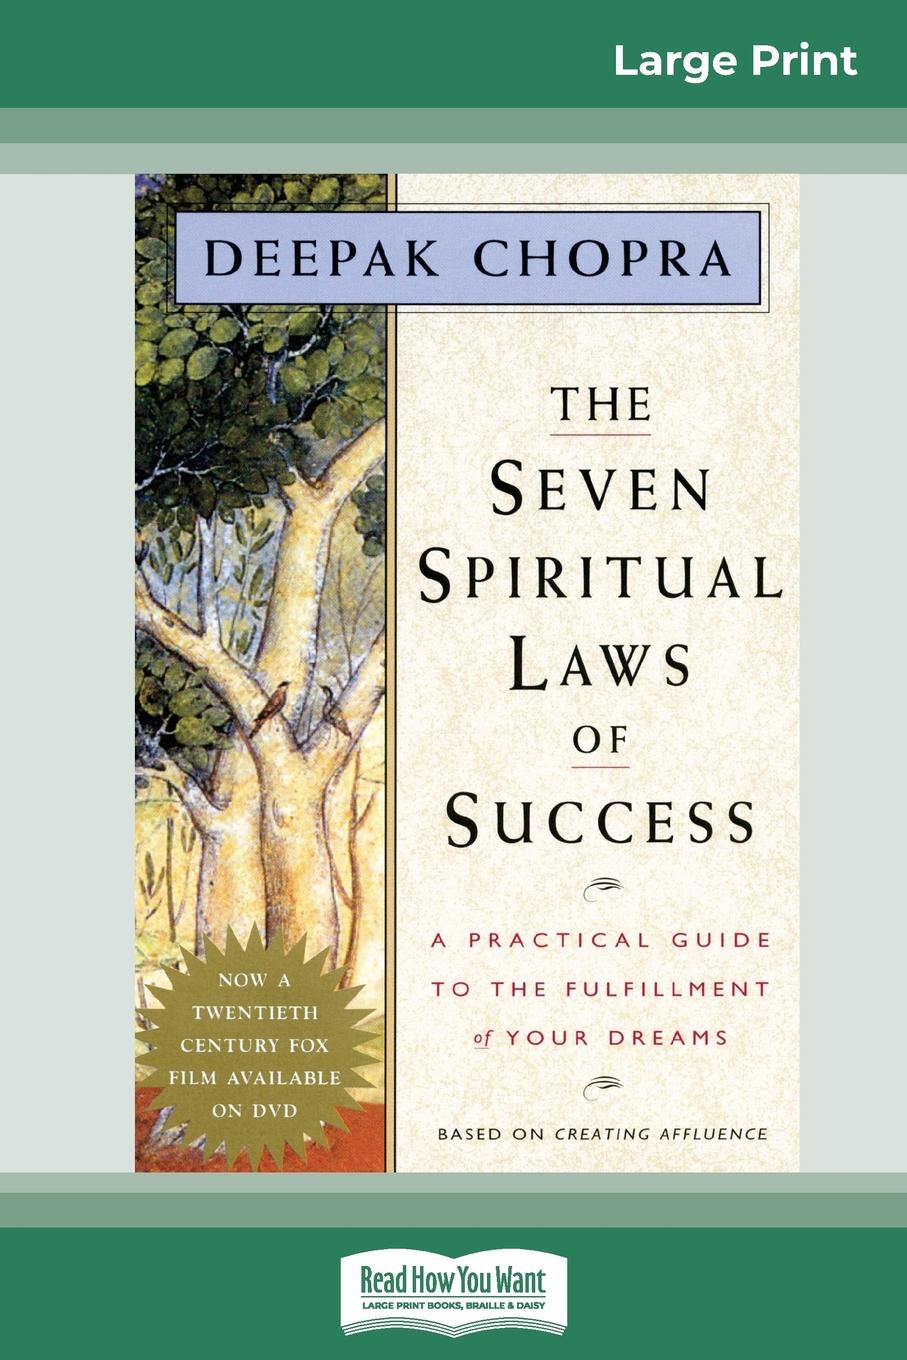 The Seven Spiritual Laws of Success. A Practical Guide to the Fulfillment of Your Dreams (16pt Large Print Edition)